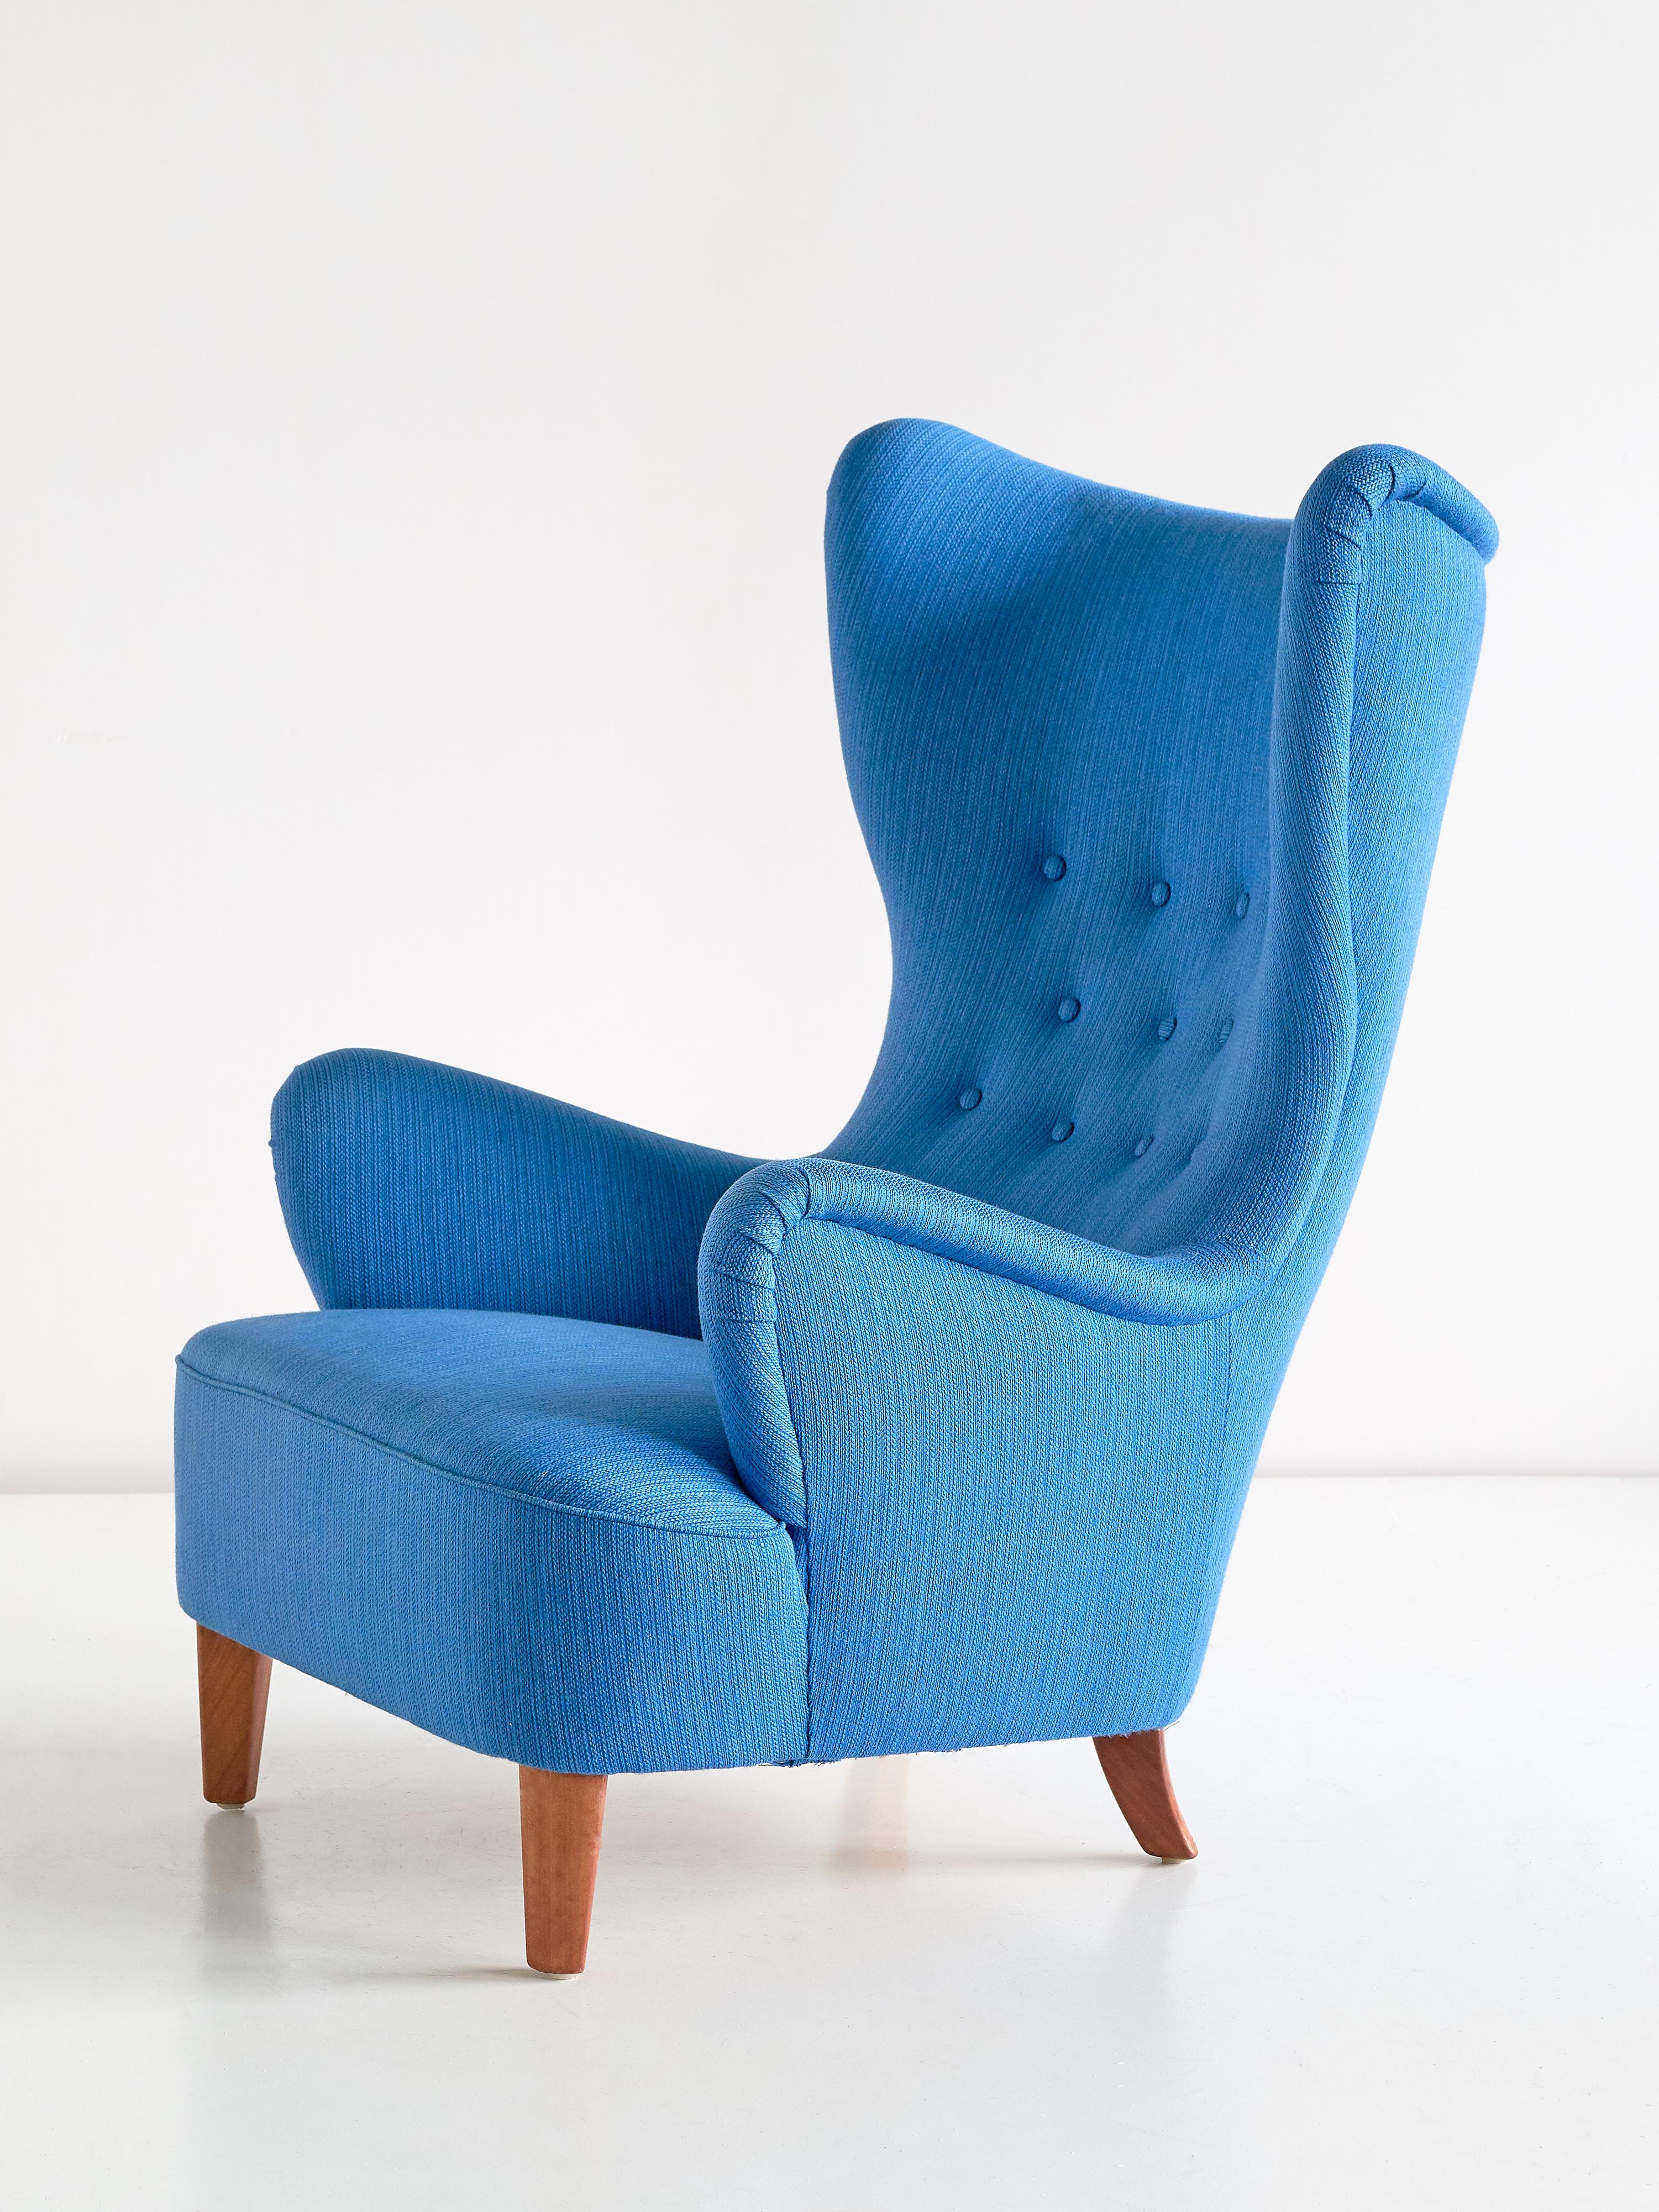 Mid-20th Century Arne Färnrot Wingback Chair in Blue Wool Fabric and Mahogany, Sweden, Late 1940s